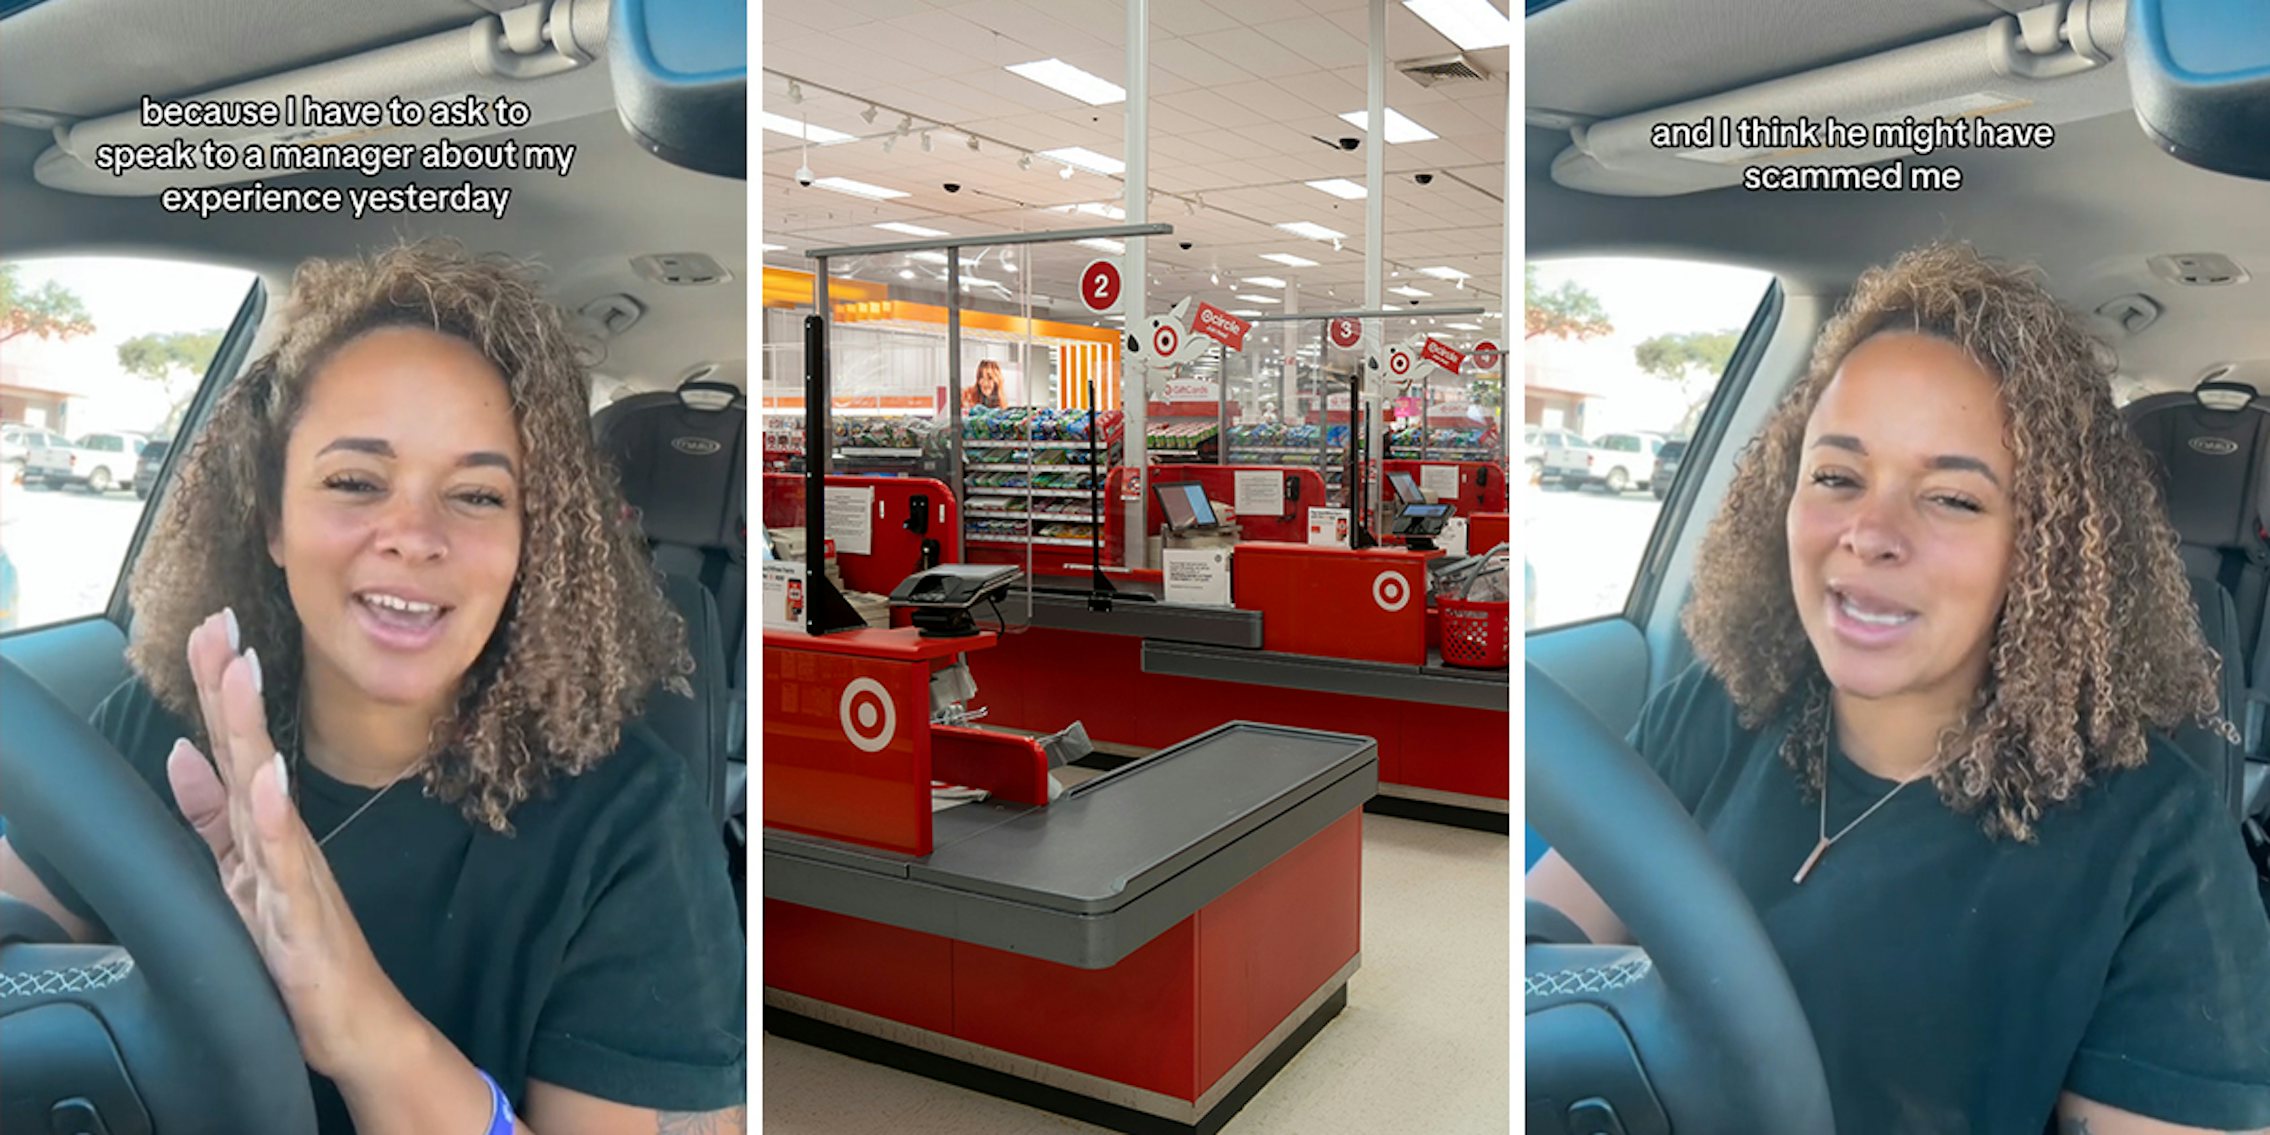 Target customer speaking in car with caption 'because I have to ask to speak to a manager about my experience yesterday' (l) Target checkout lanes (c) Target customer speaking in car with caption 'and I think he might have scammed me' (r)